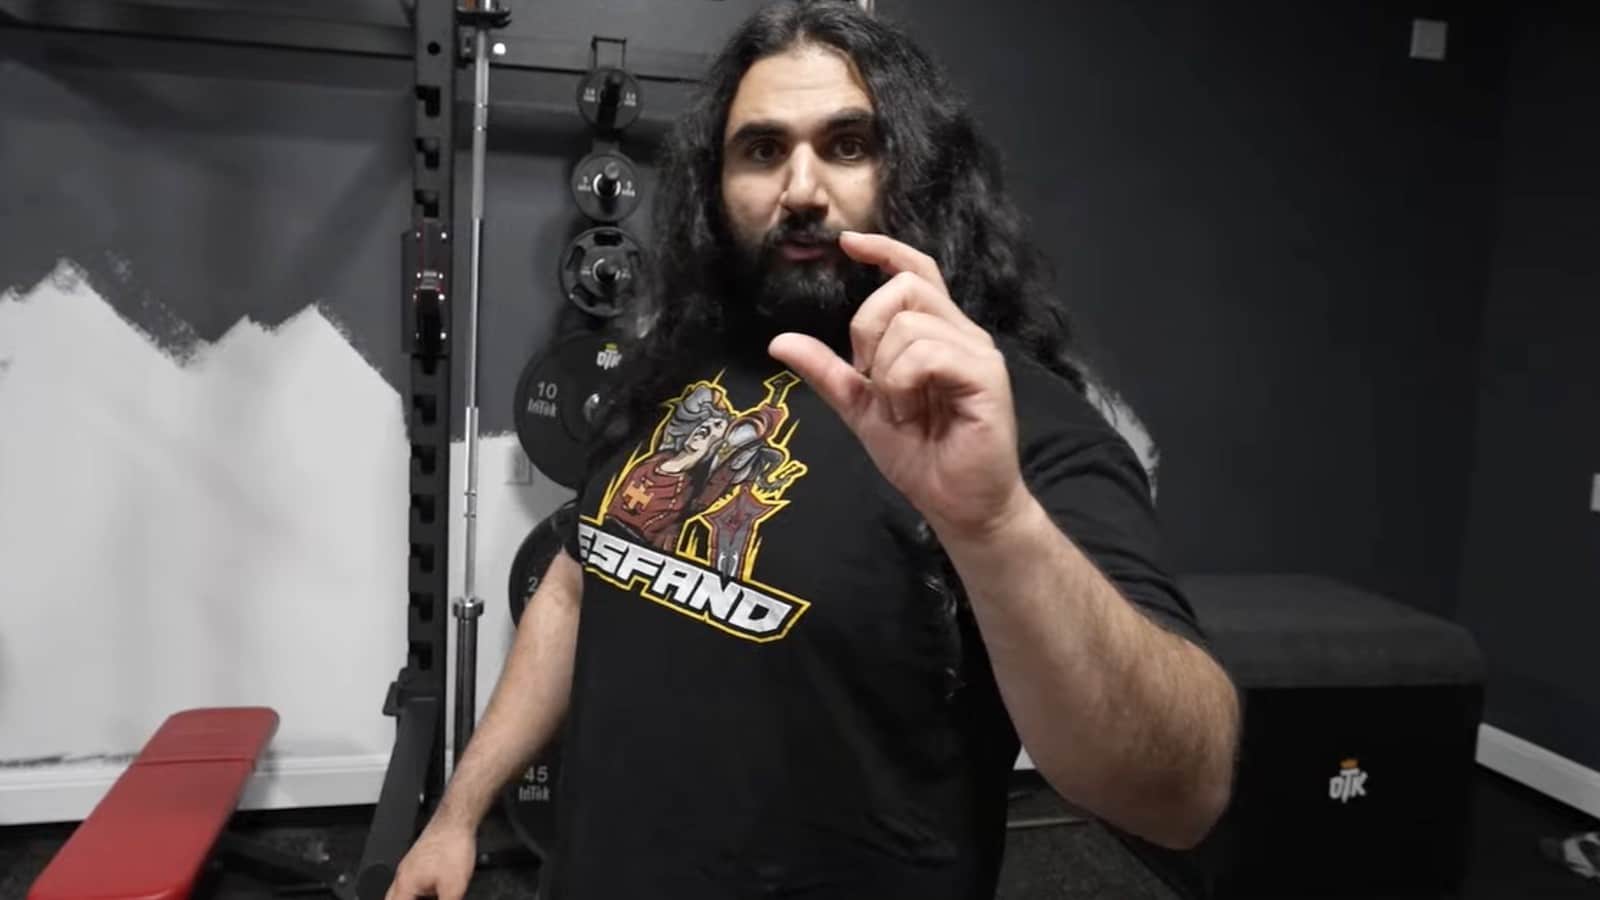 Twitch streamer Esfand showing off new home gym in YouTube video